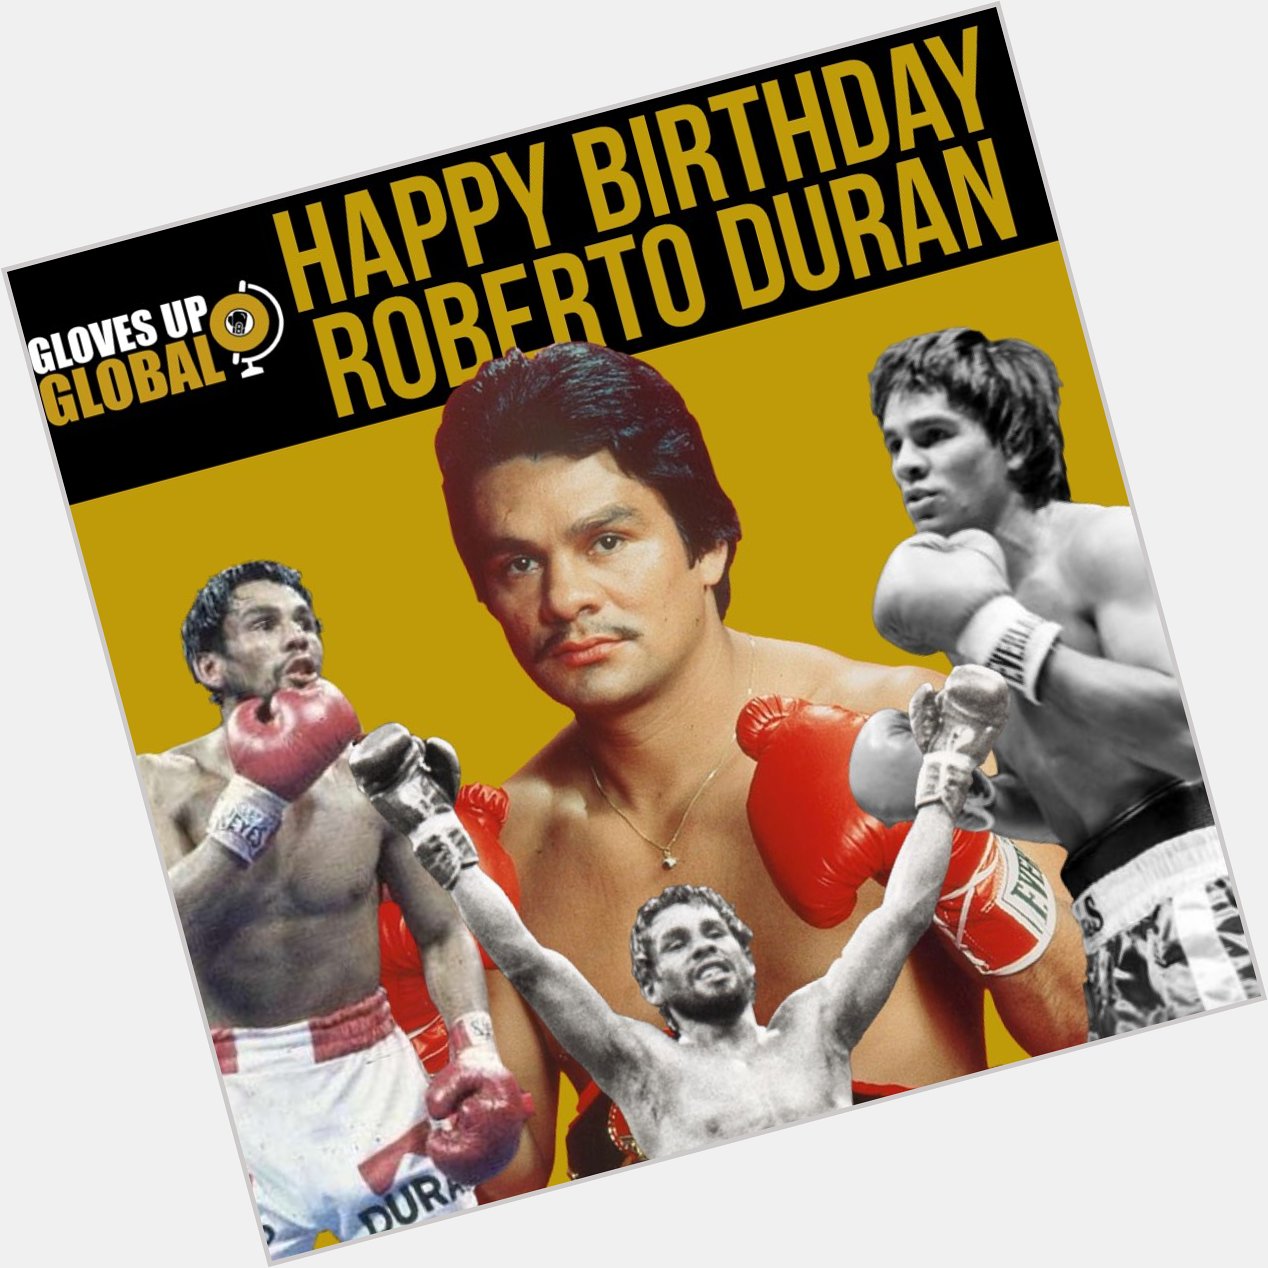 Happy birthday to the former 4 Weight World Champion Roberto Duran, who turns 69 today   